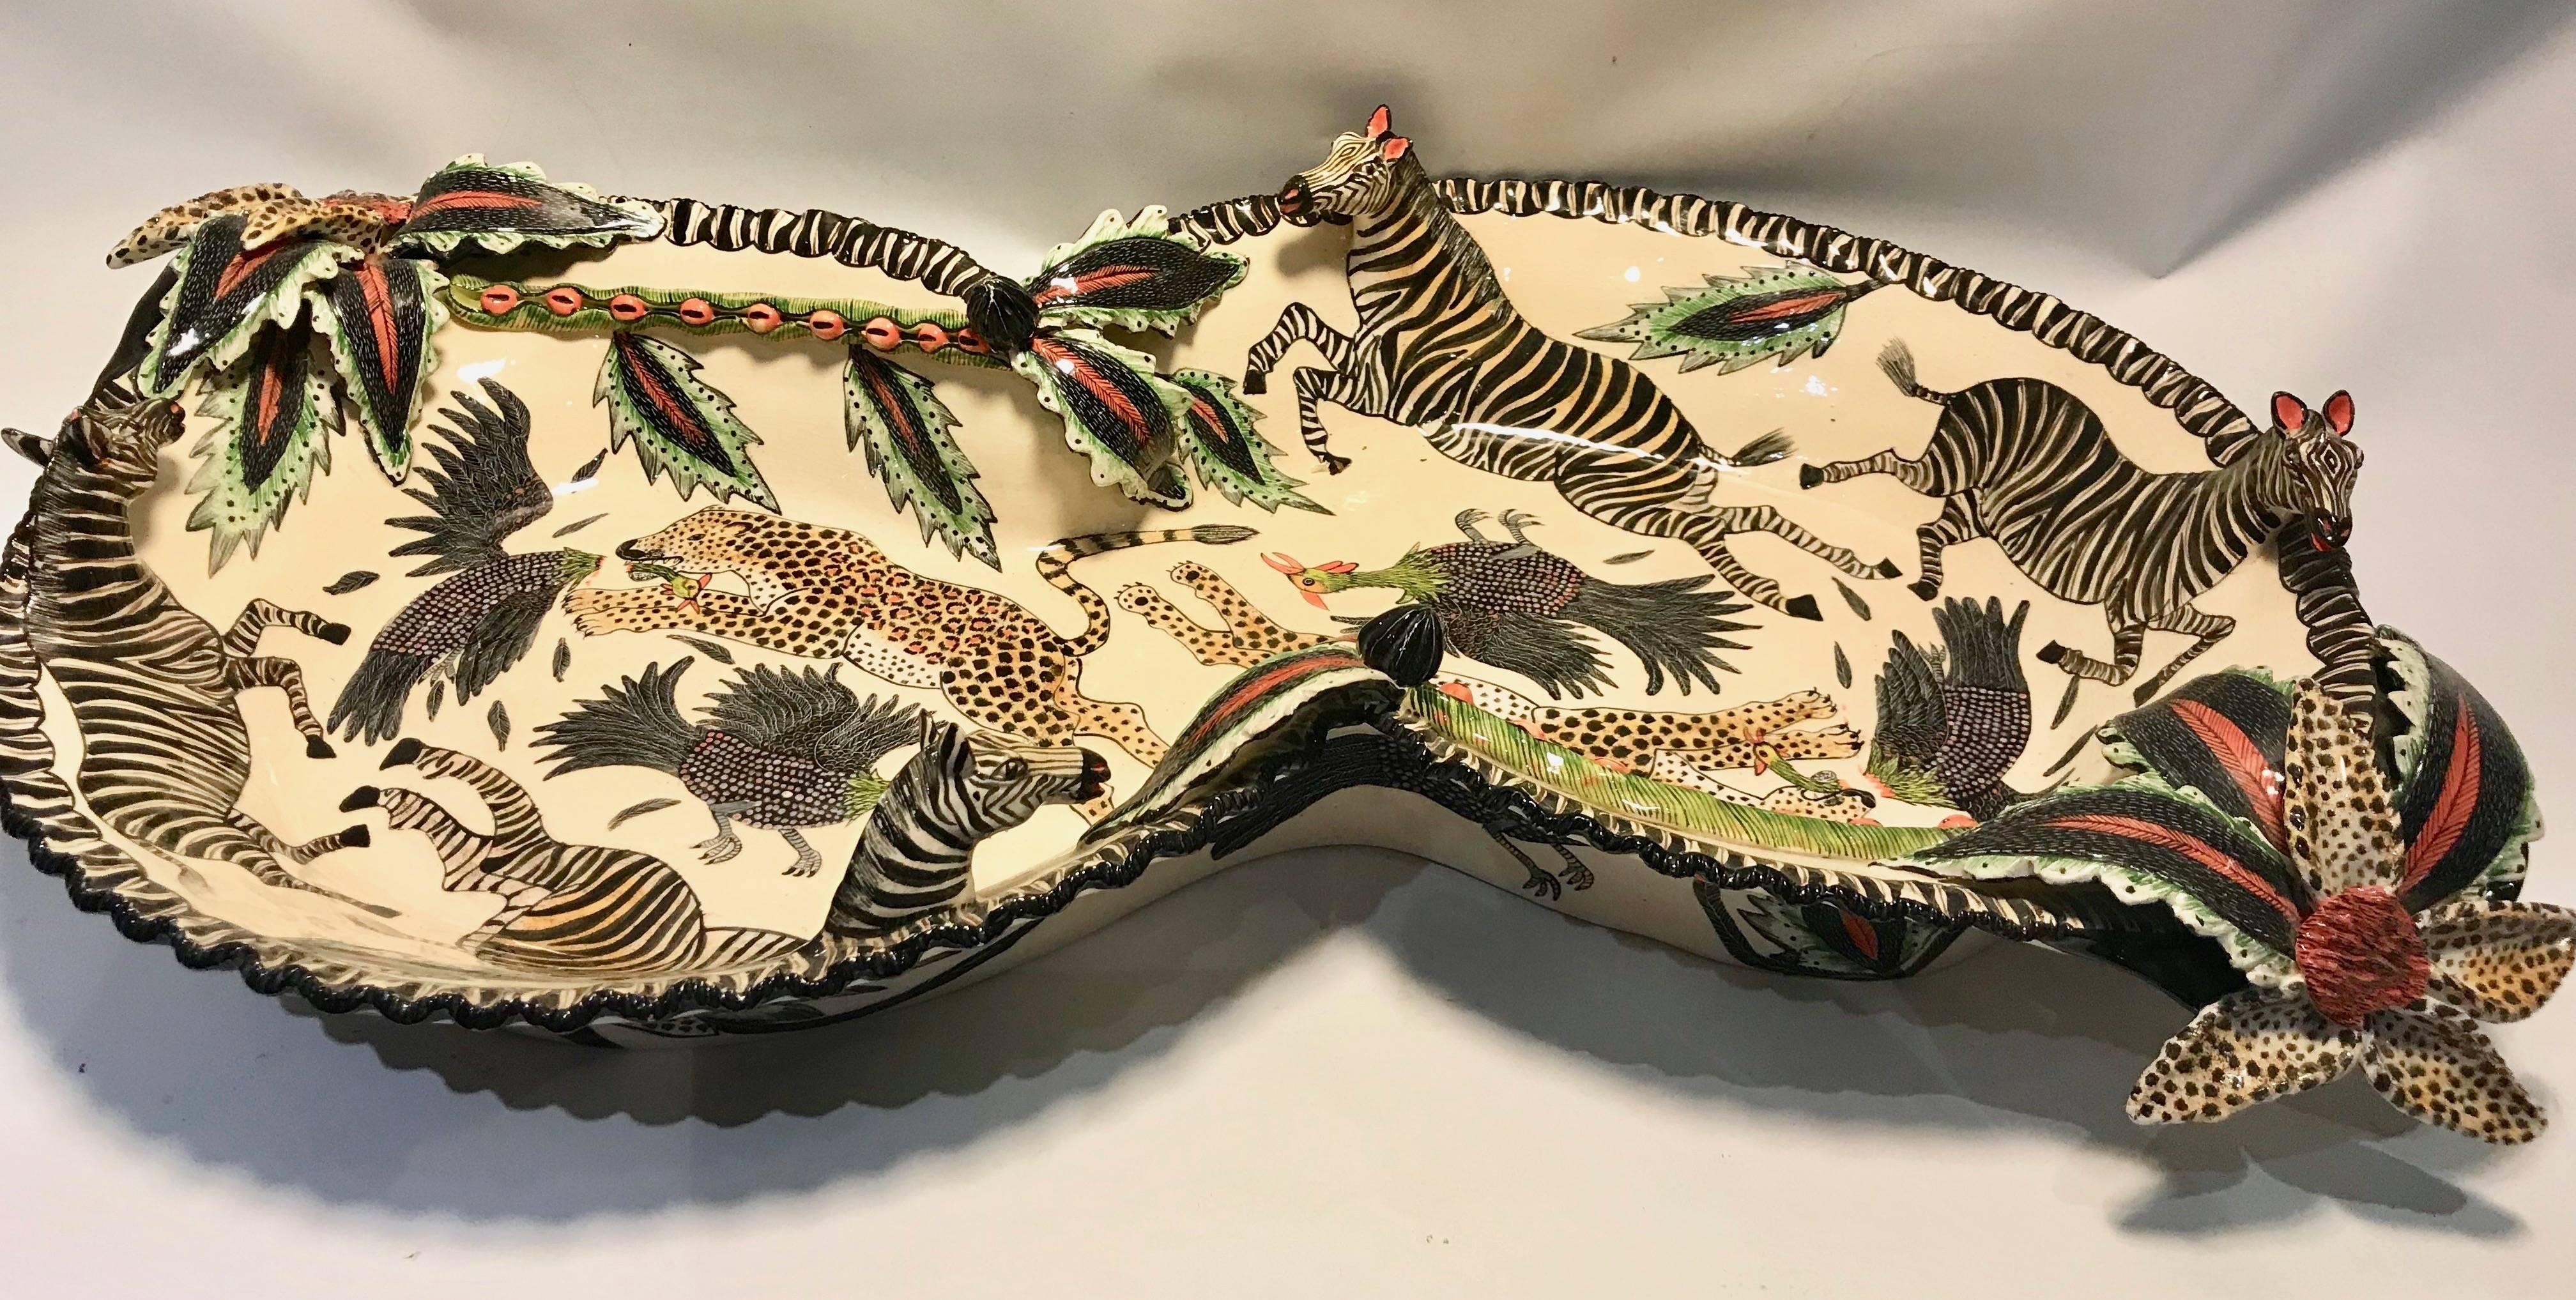 Contemporary Zebra and Leopard Decorative Dish or Bowl by Ardmore Ceramics, South Africa